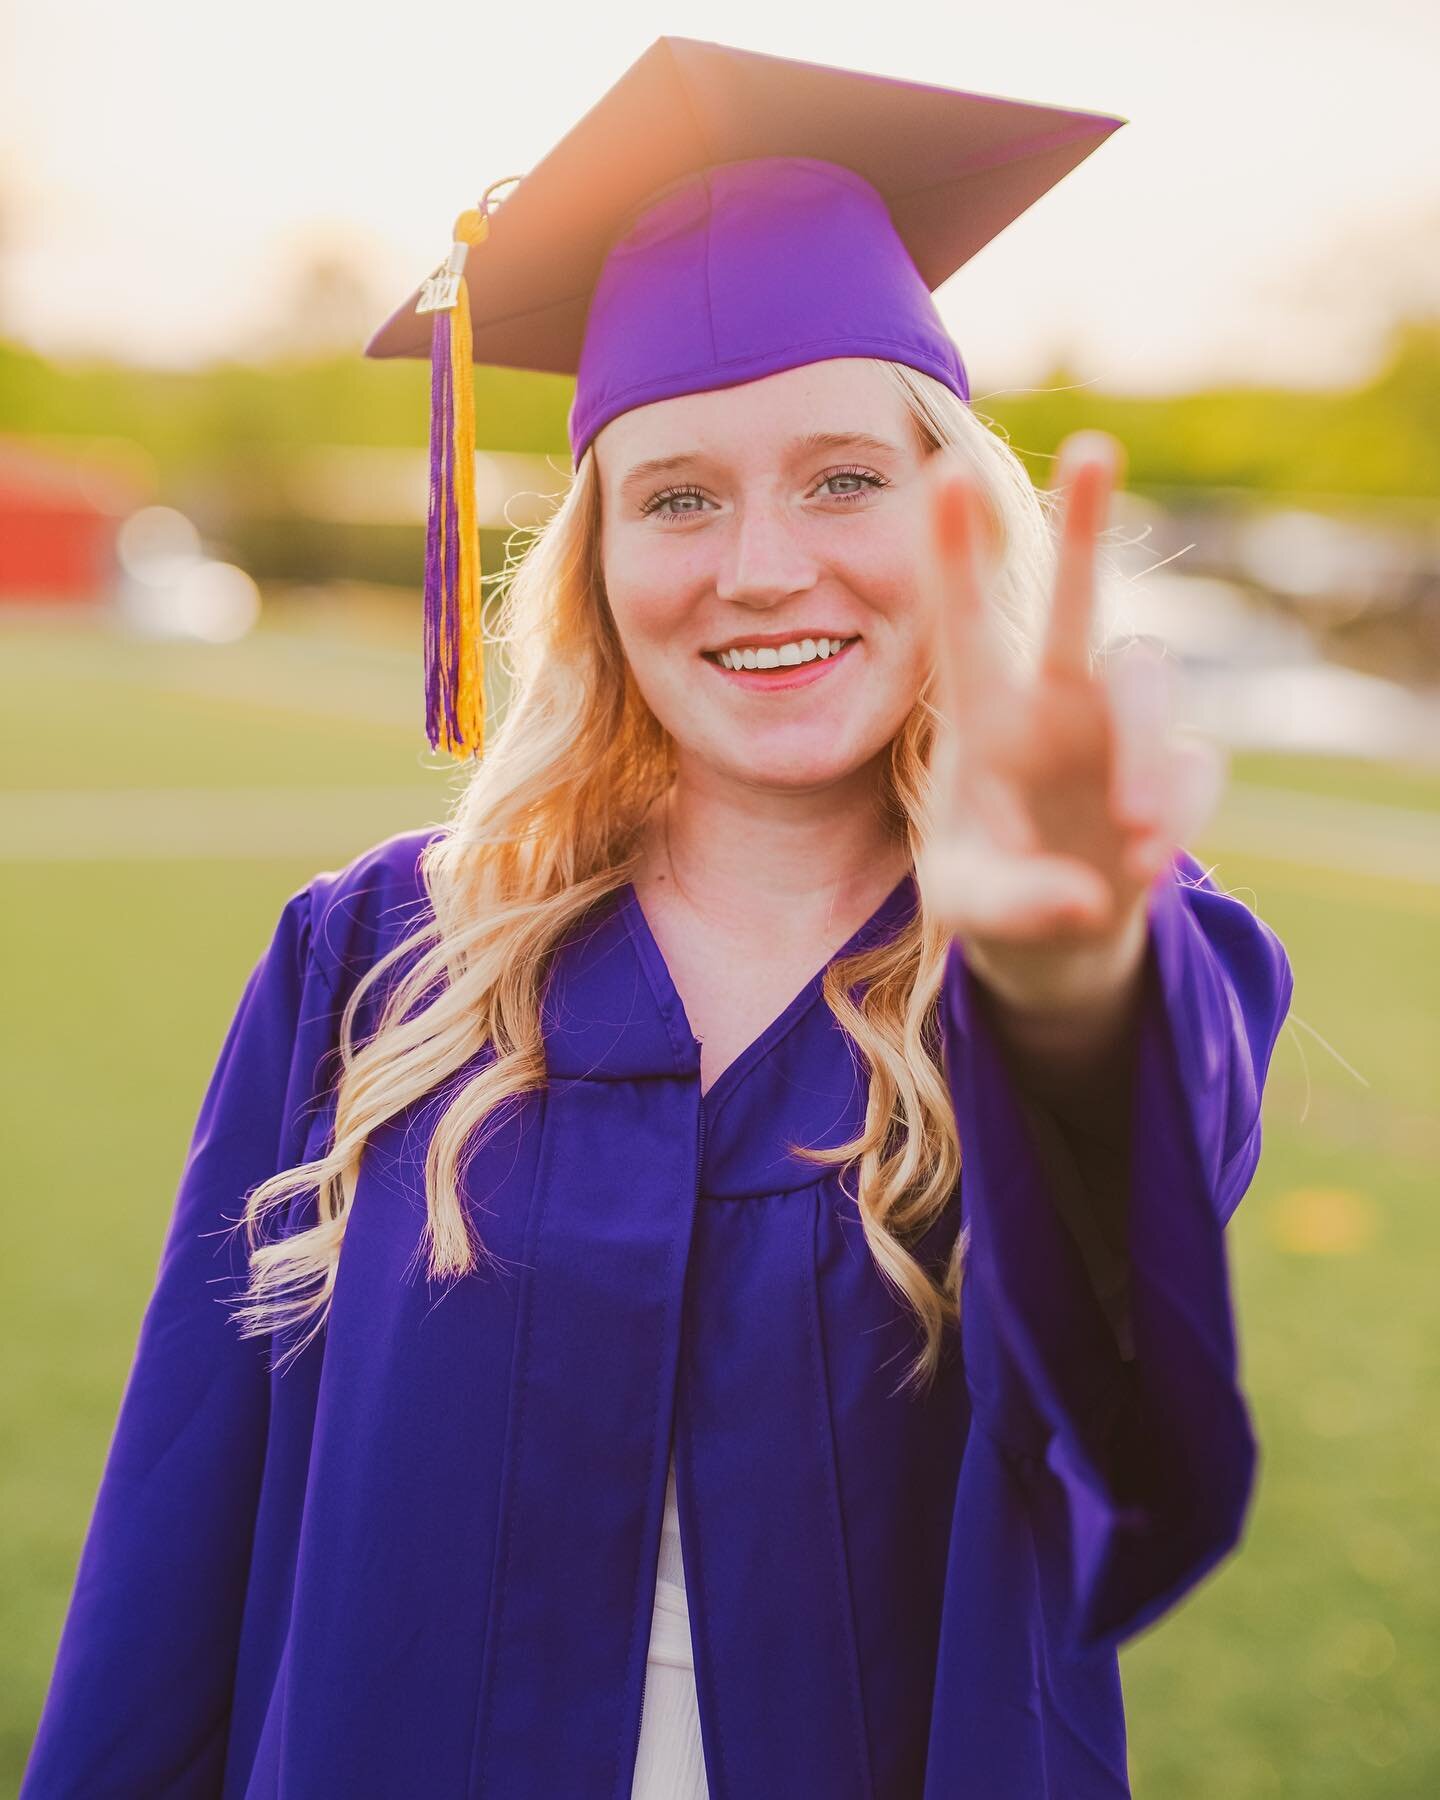 Class of &lsquo;23, graduation day is just around the corner! 🎓🎉 Celebrate this milestone with cap &amp; gown photos that you (and your parents) will treasure for years to come. Whether you're looking for a classic or modern look, we'll capture you